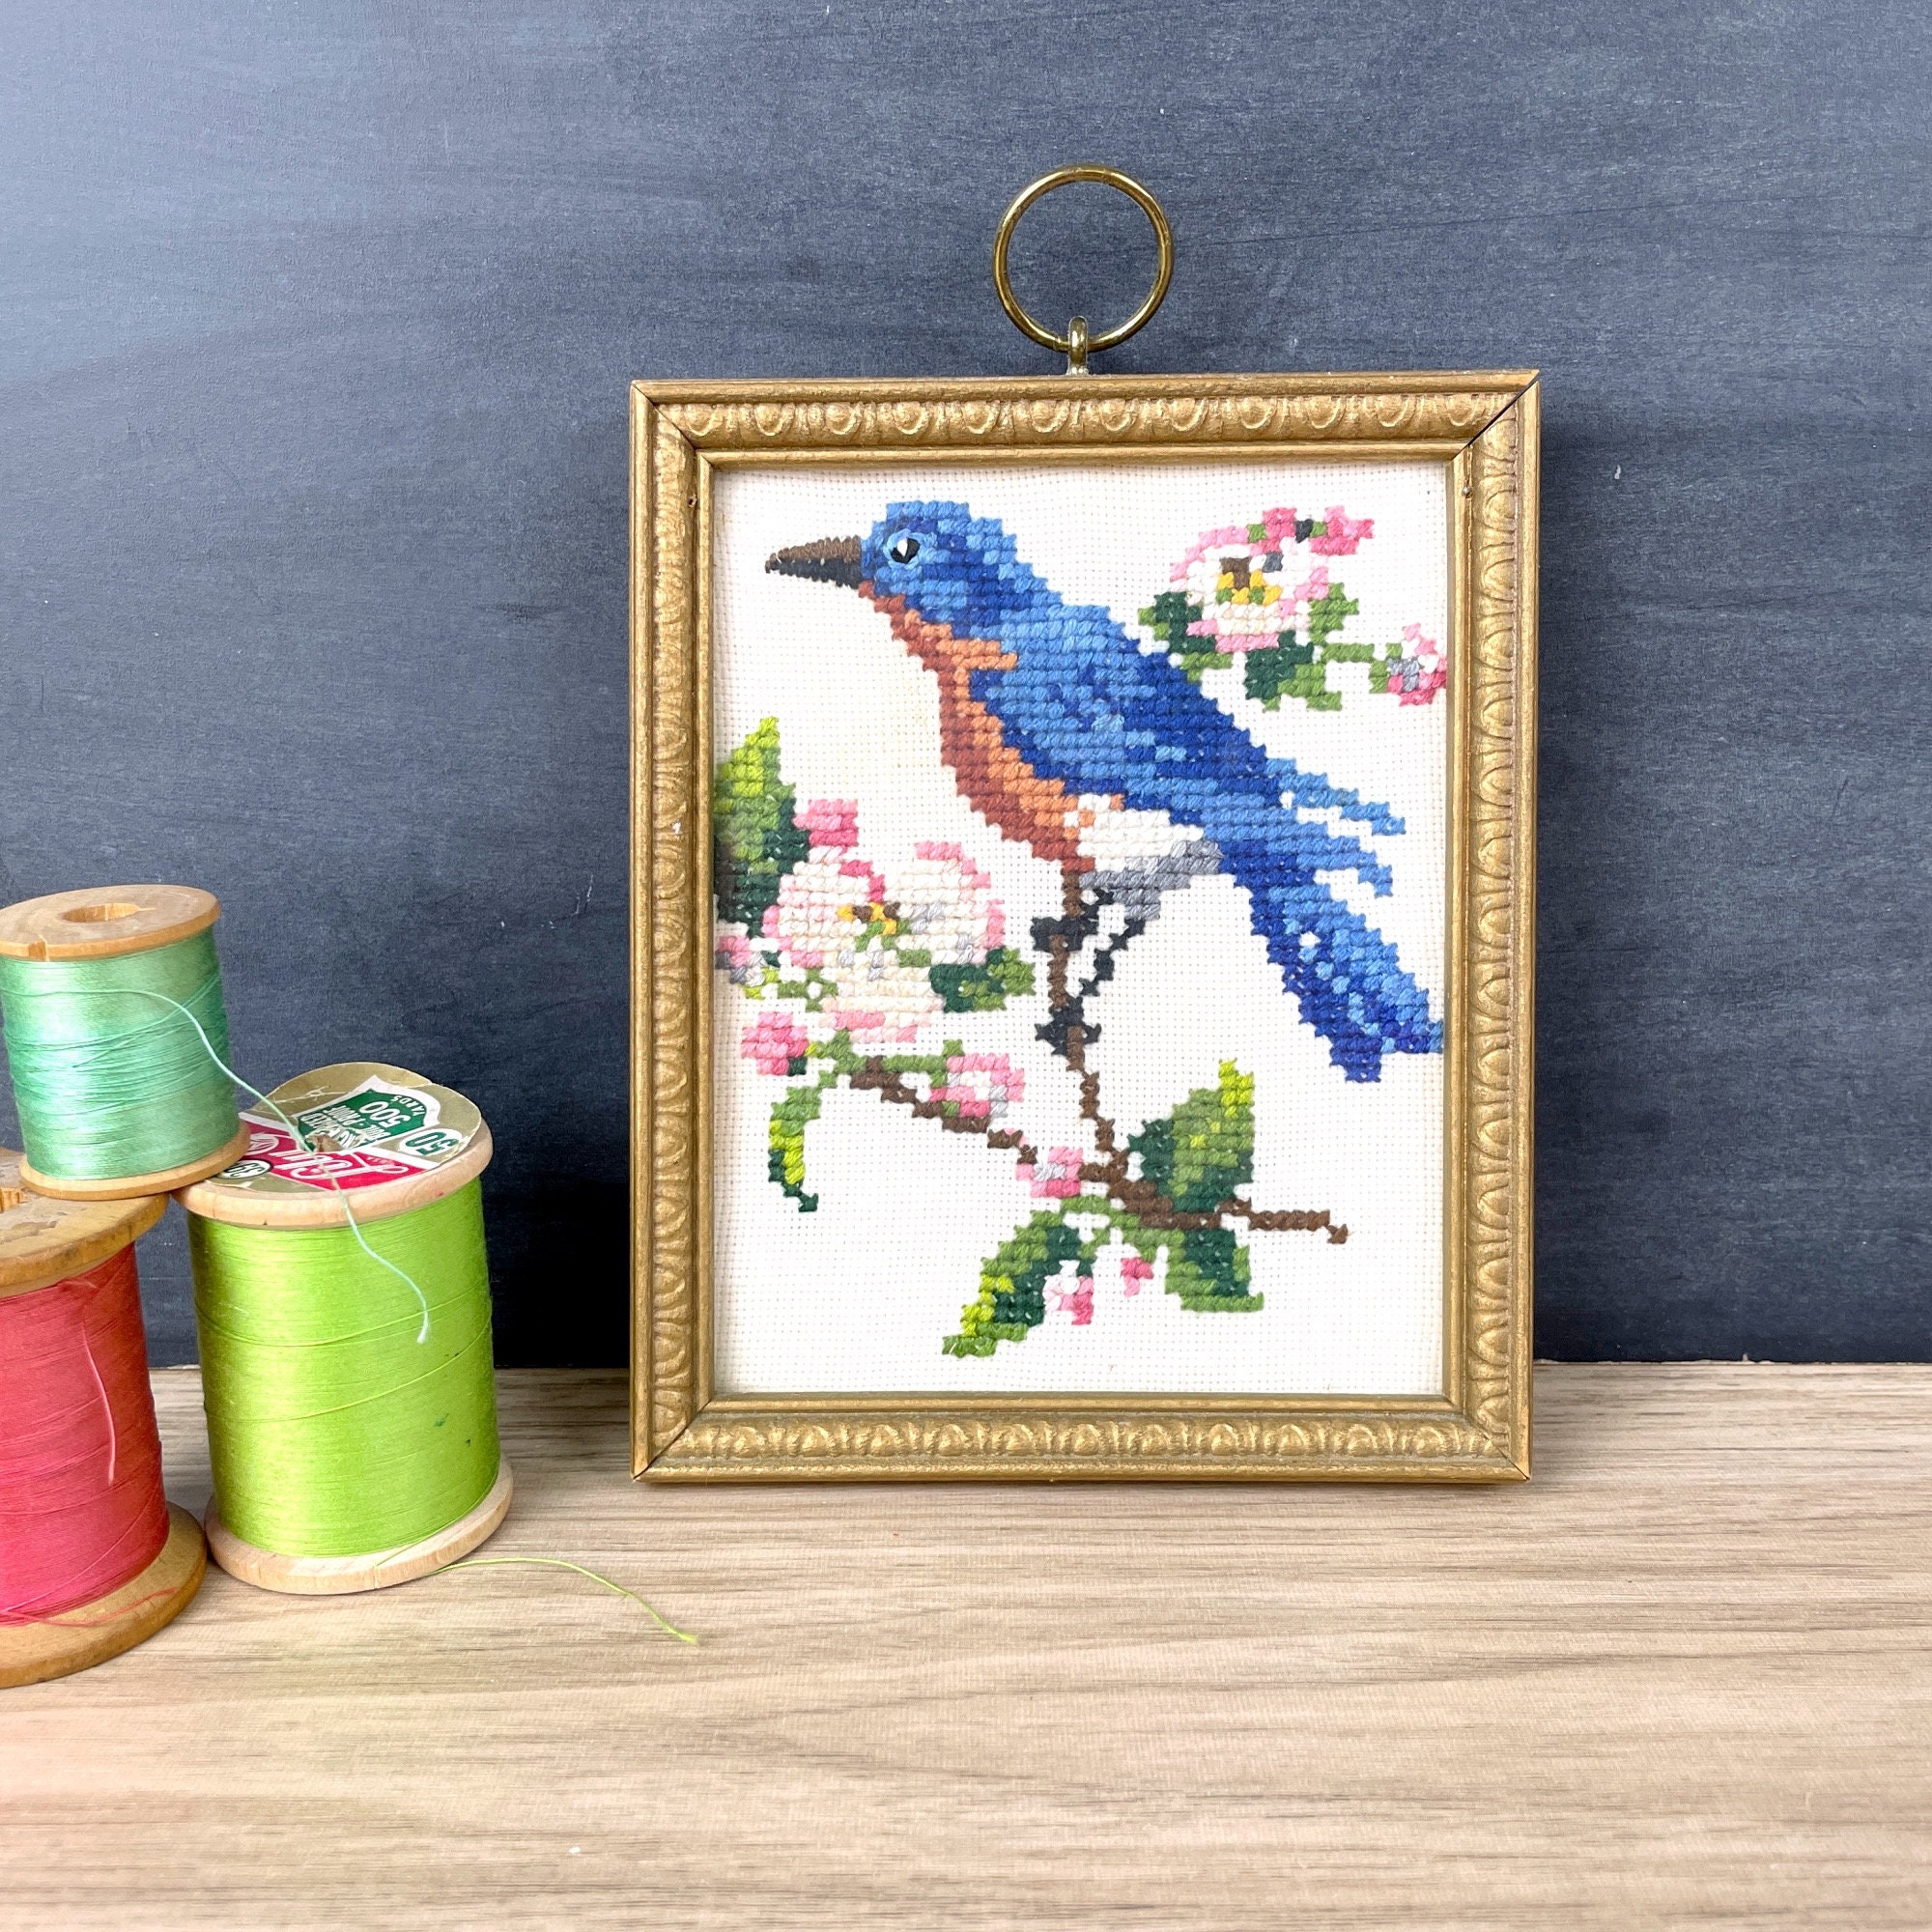 Bluebird Slow Stitching Kit, Beginners Embroidery, Easy Sewing Project,  Fabric Collage, Mindful Craft, Stitch Therapy 